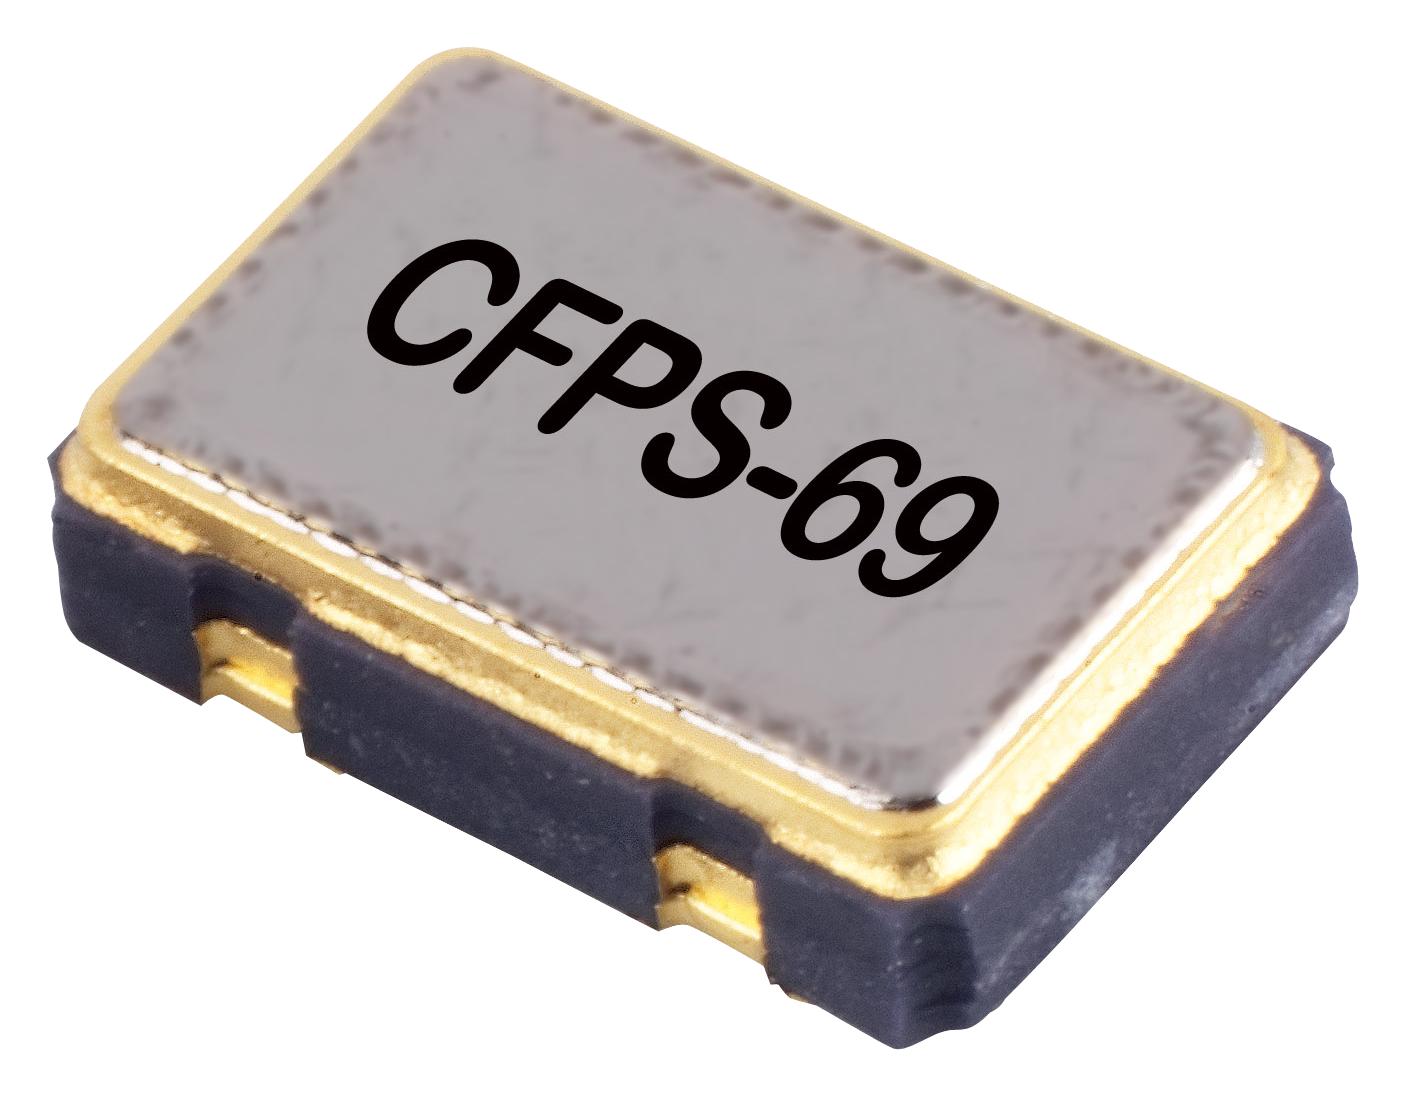 LFSPXO009584 CRYSTAL OSCILLATOR, SMD, 10MHZ IQD FREQUENCY PRODUCTS